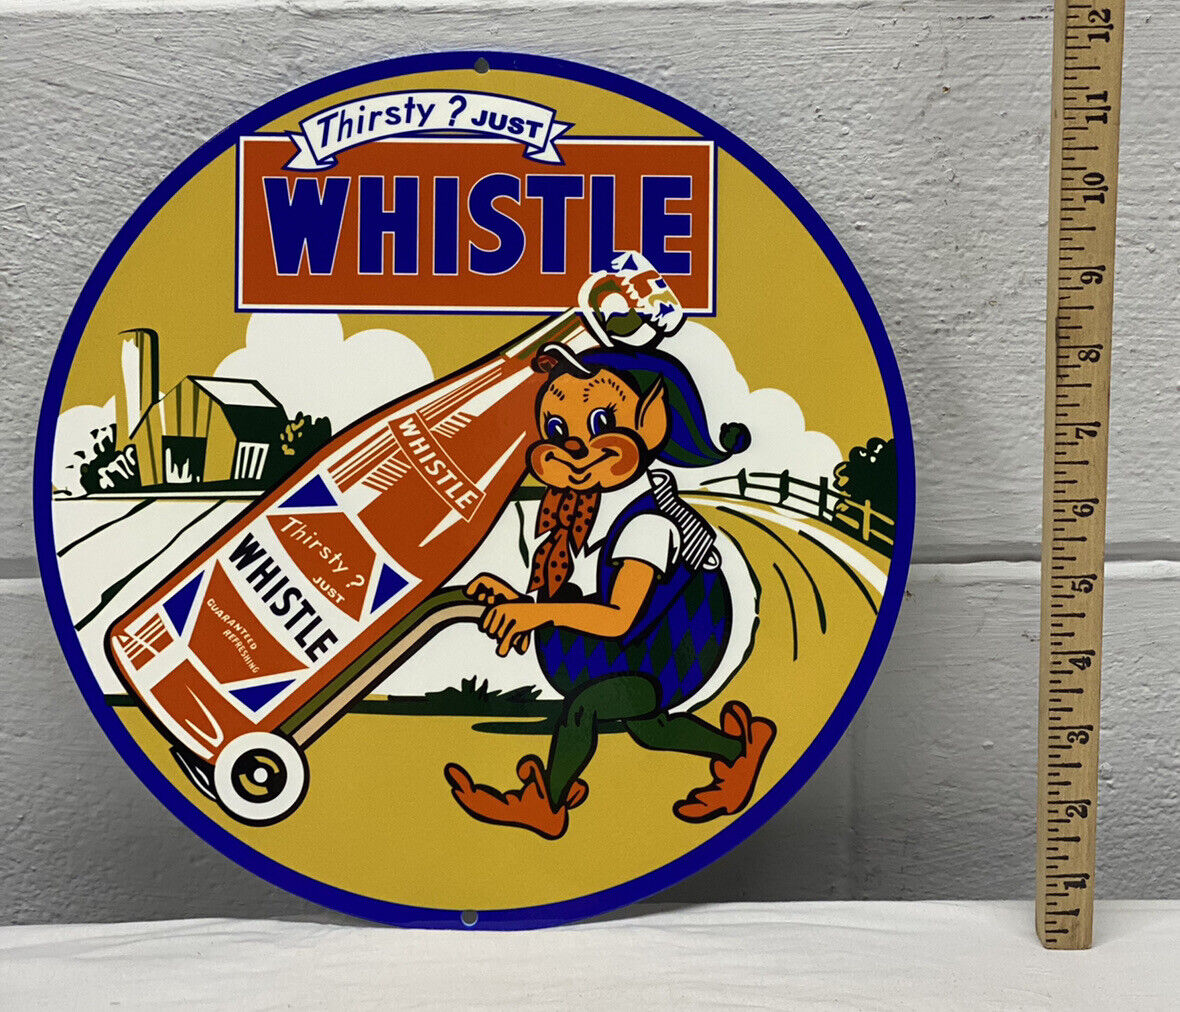 Thirsty? Just Whistle Metal Sign Soda Pop Drink Diner Refresh Bottle Gas Oil